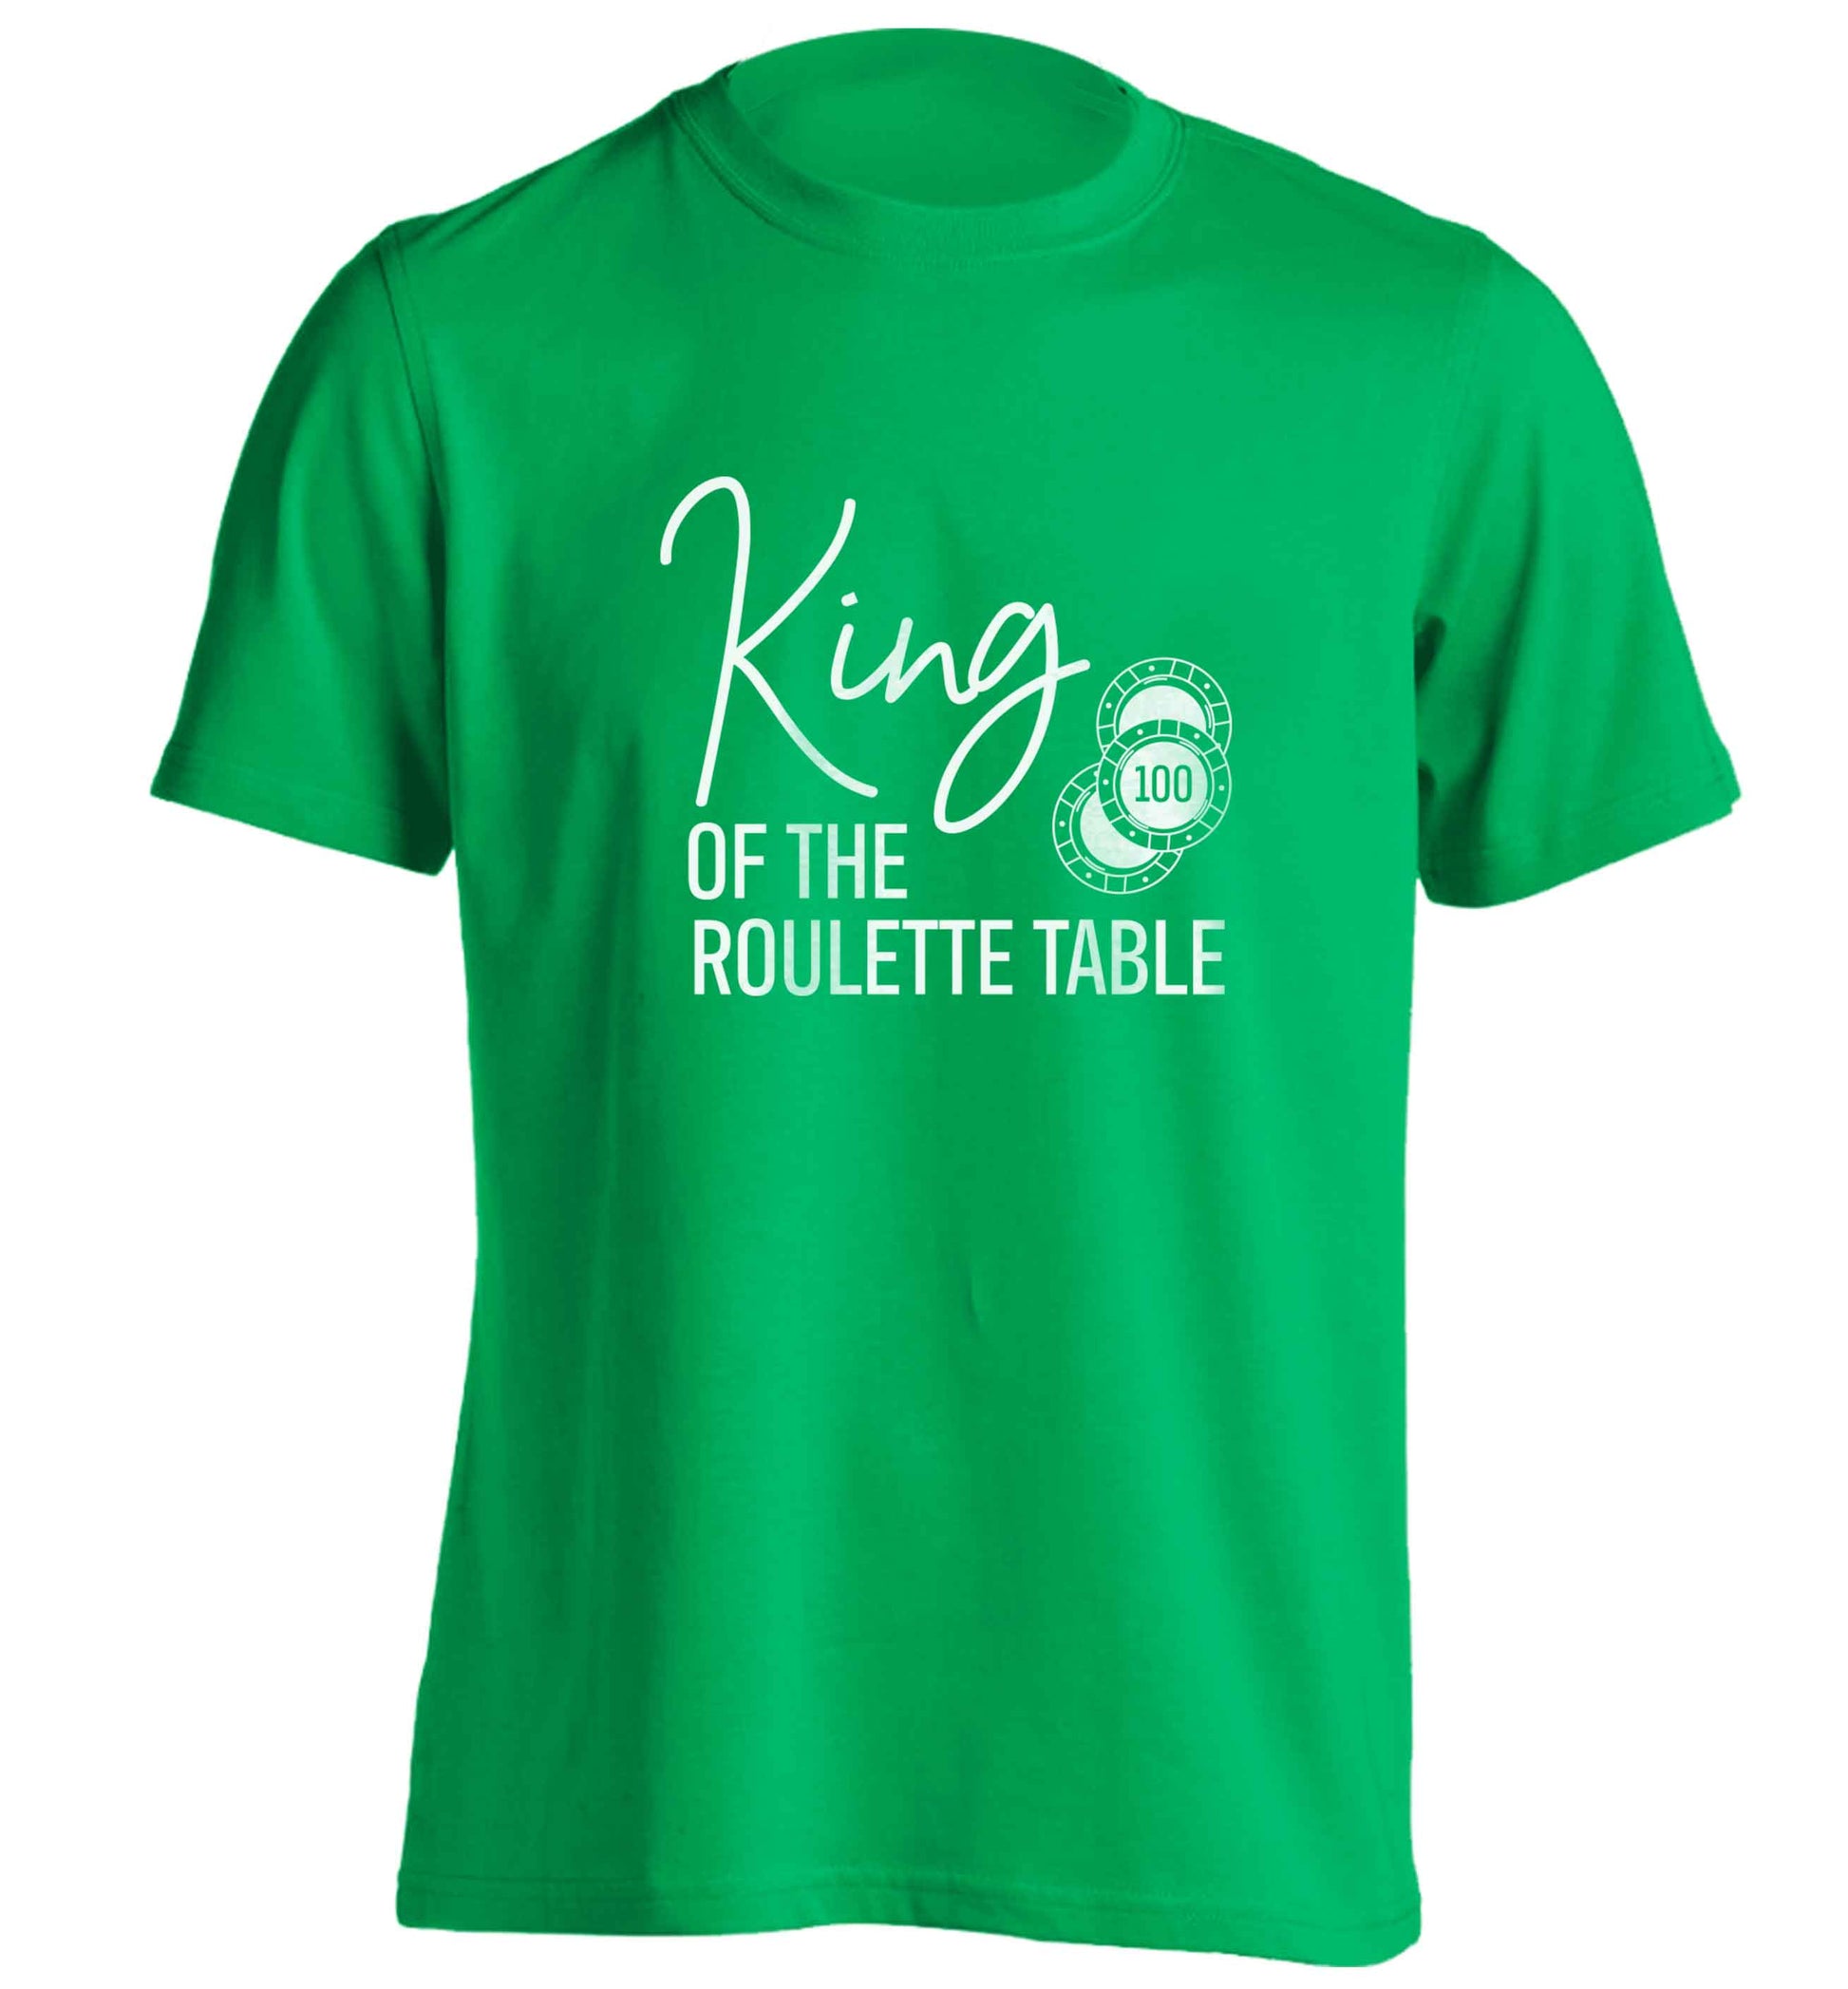 King of the roulette table adults unisex green Tshirt 2XL